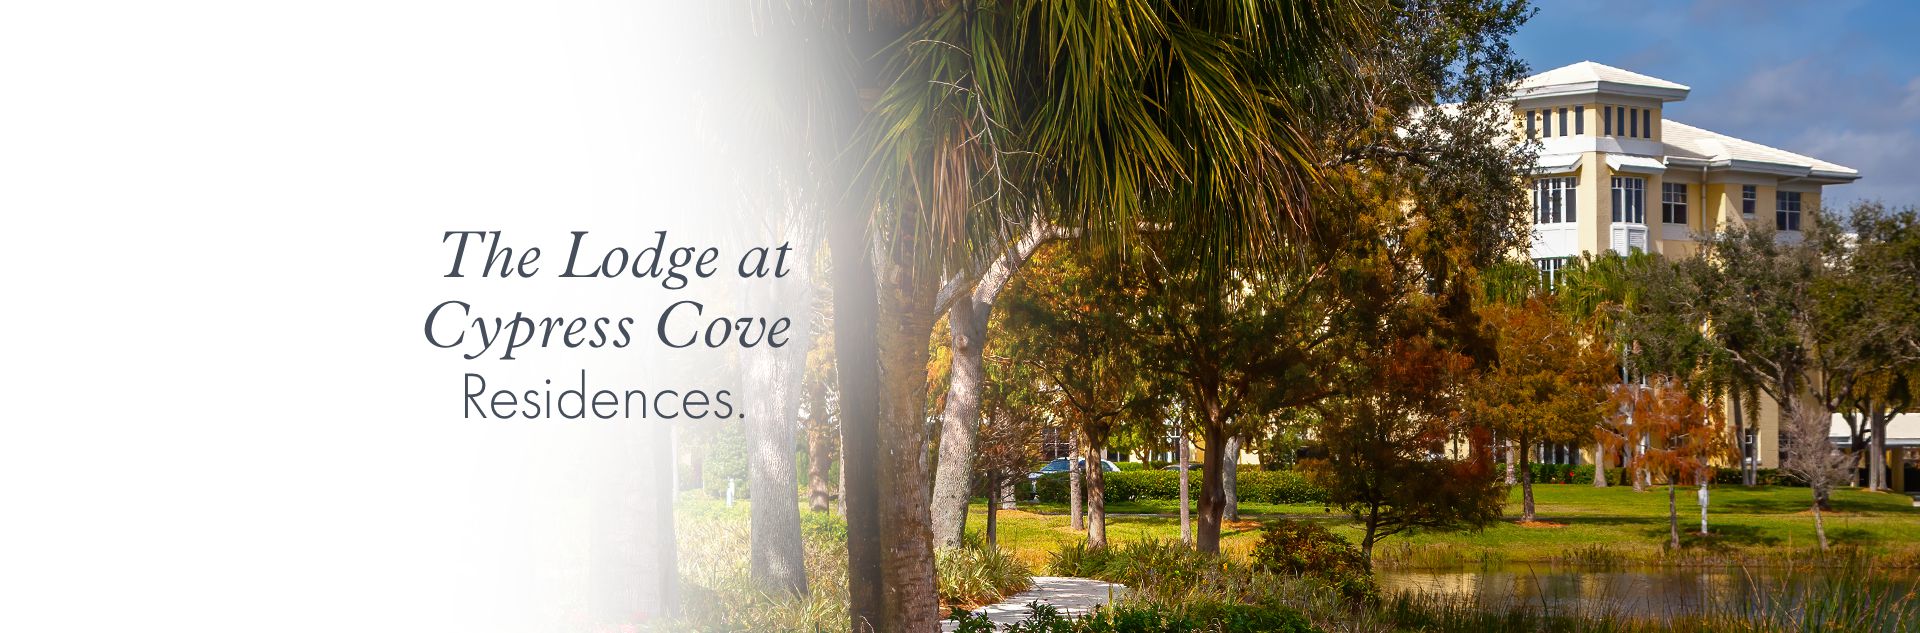  The Lodge at Cypress Cove Residences.